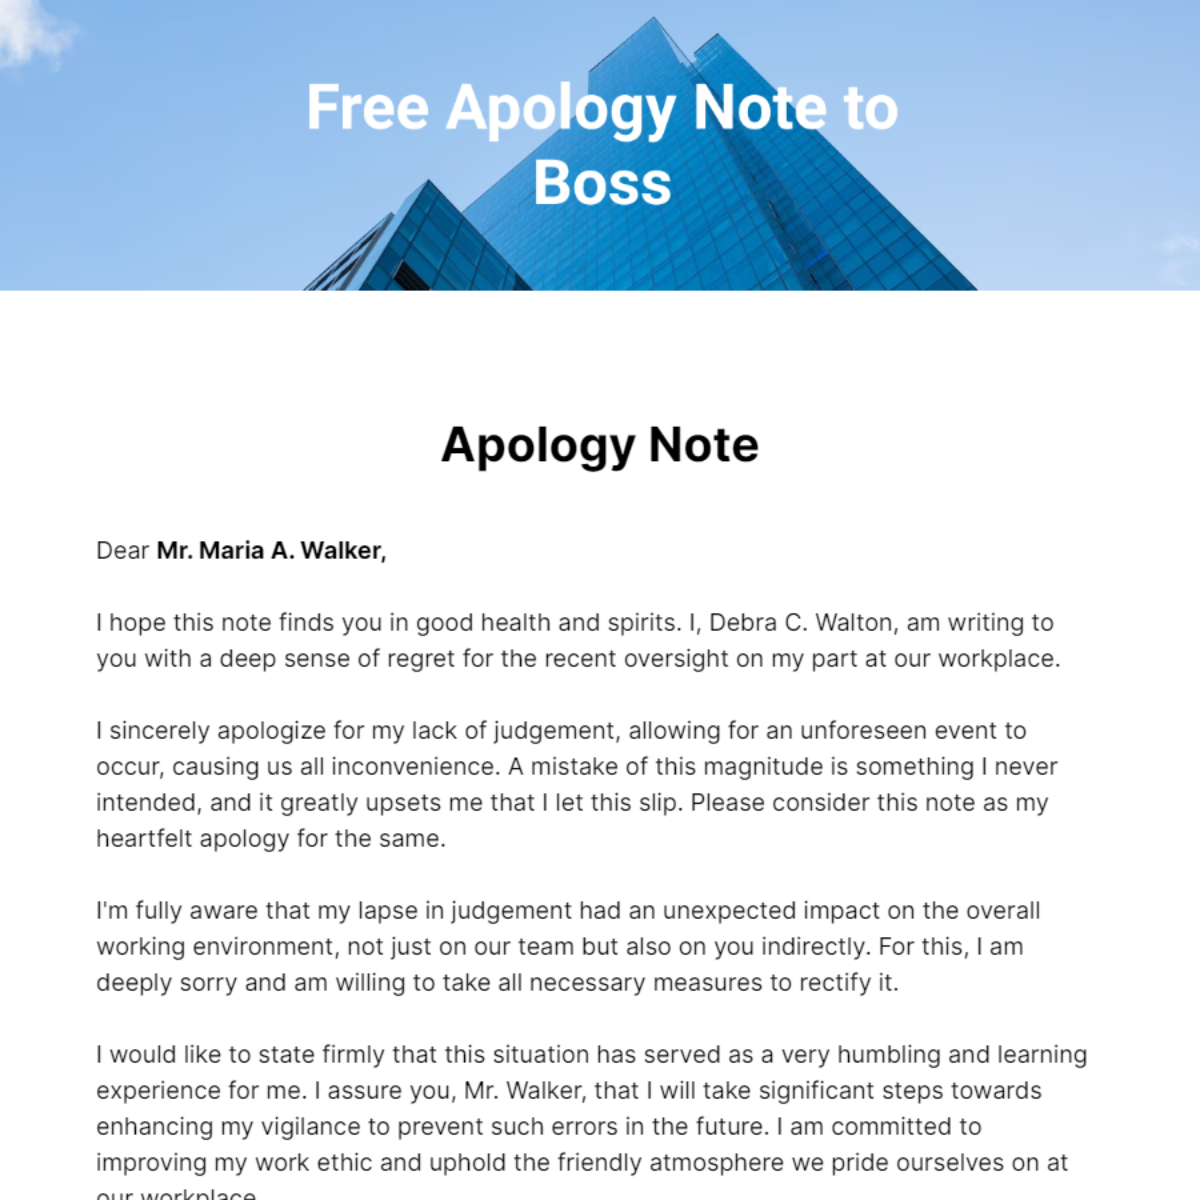 Free Apology Note to Boss Template